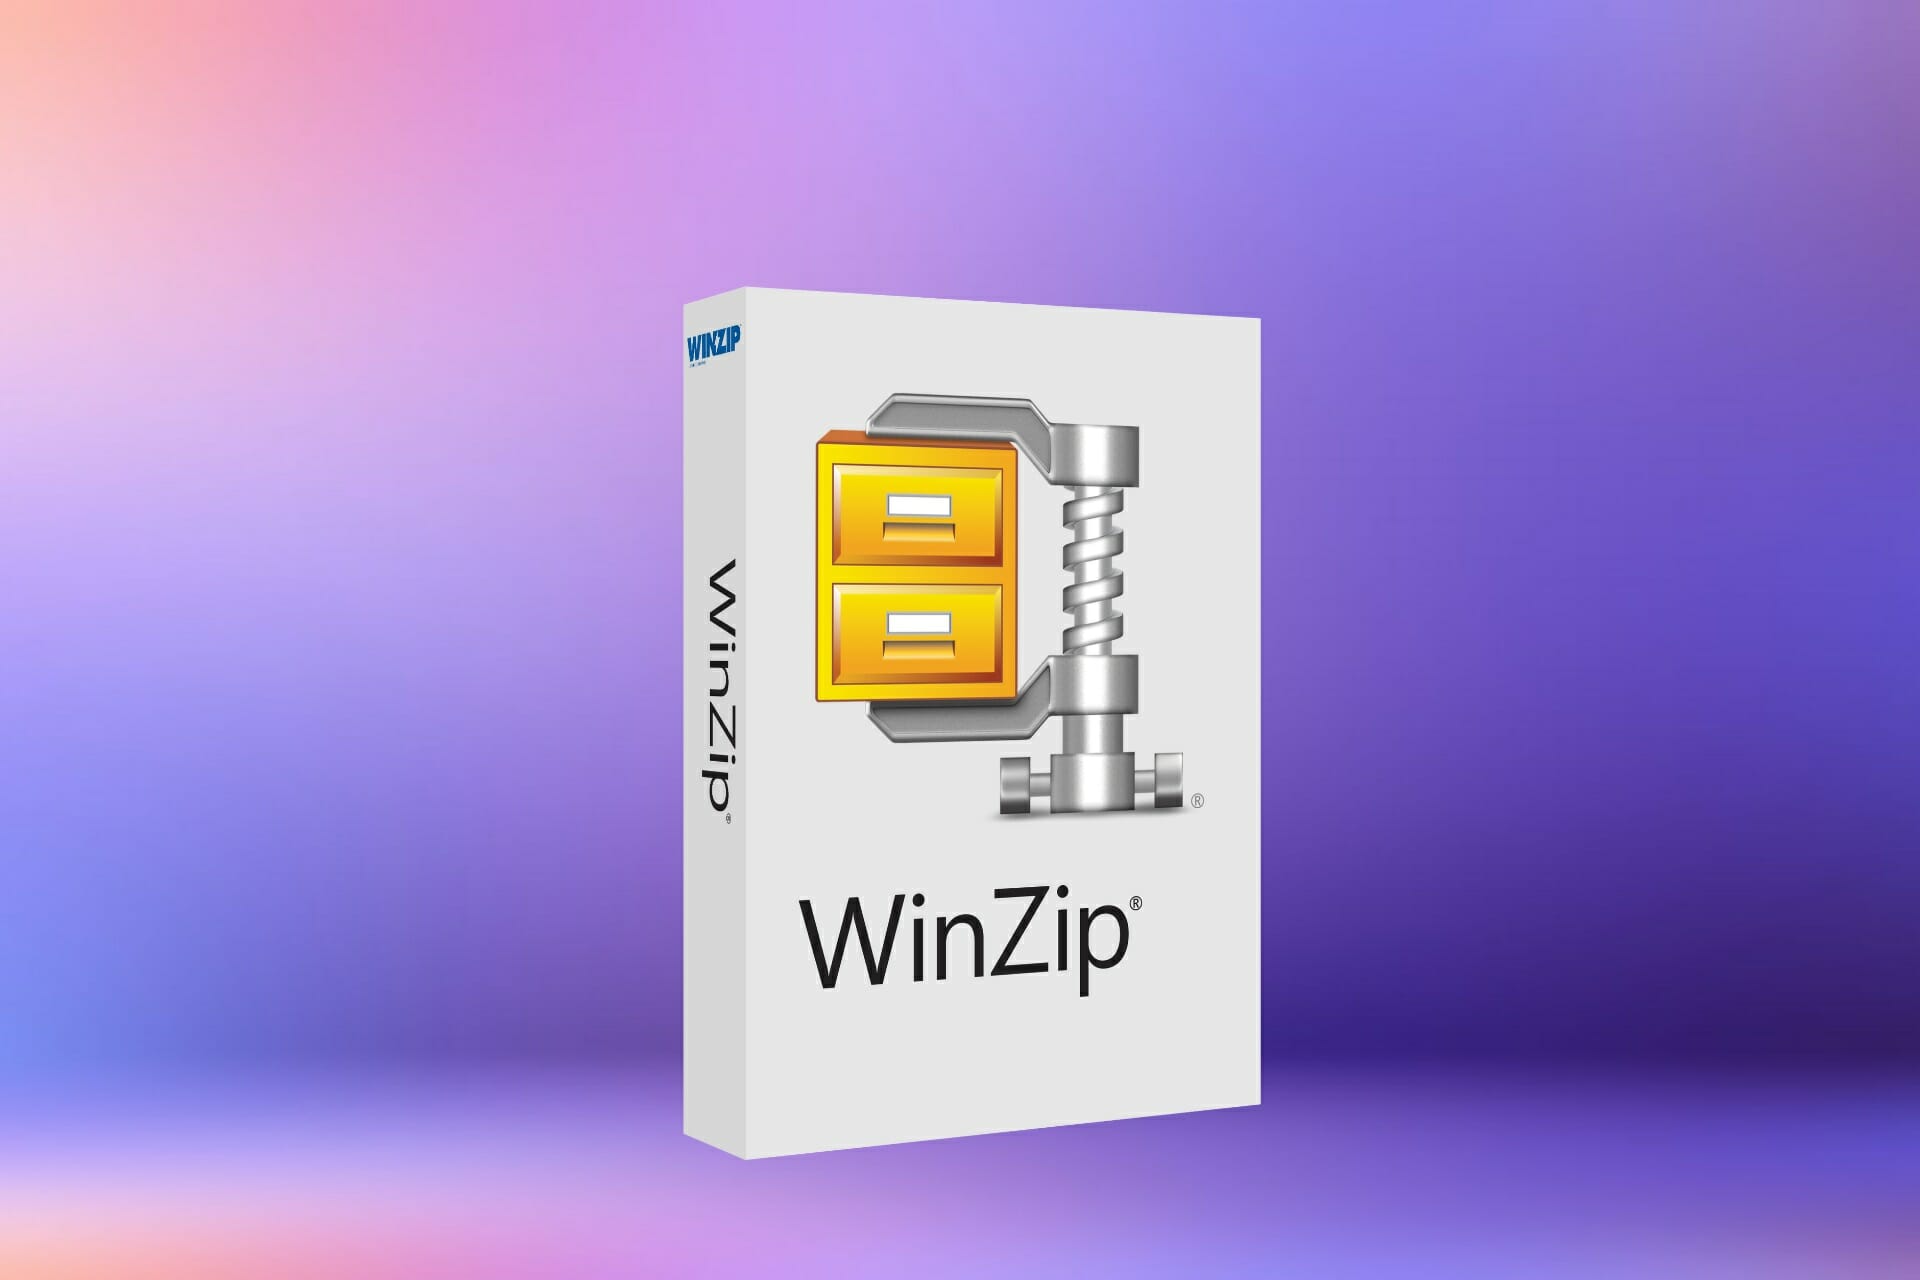 How to unzip files in Windows 7 and Windows XP